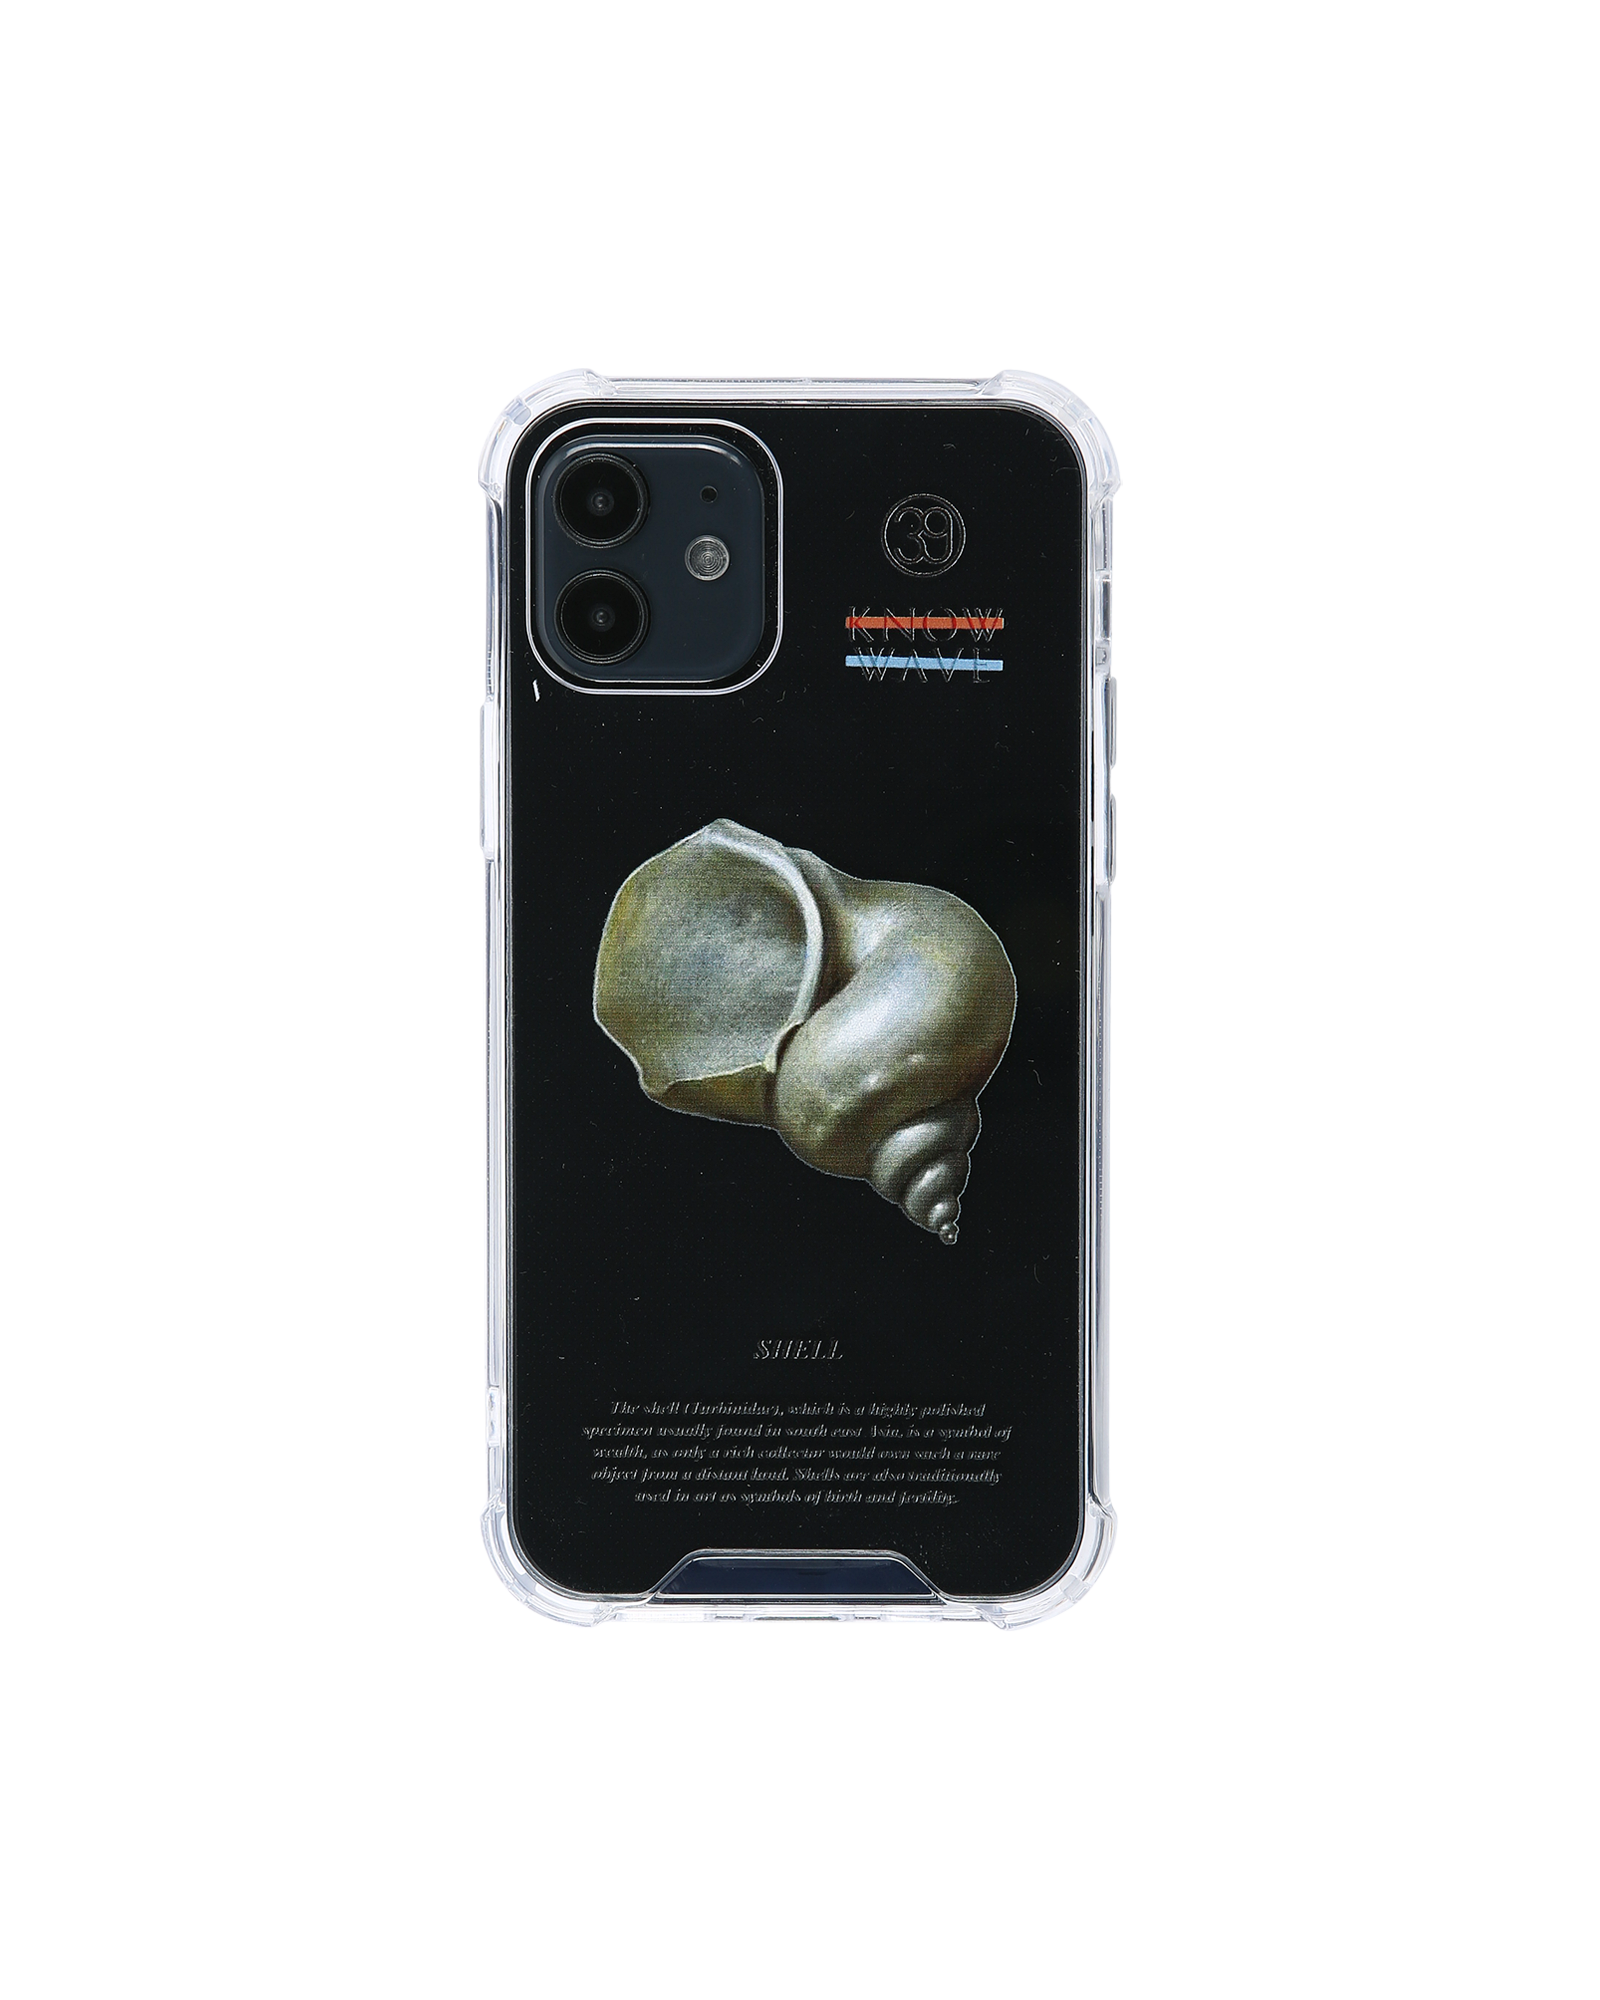 THE LUCKY CHARM iPHONE CASE (SHELL)